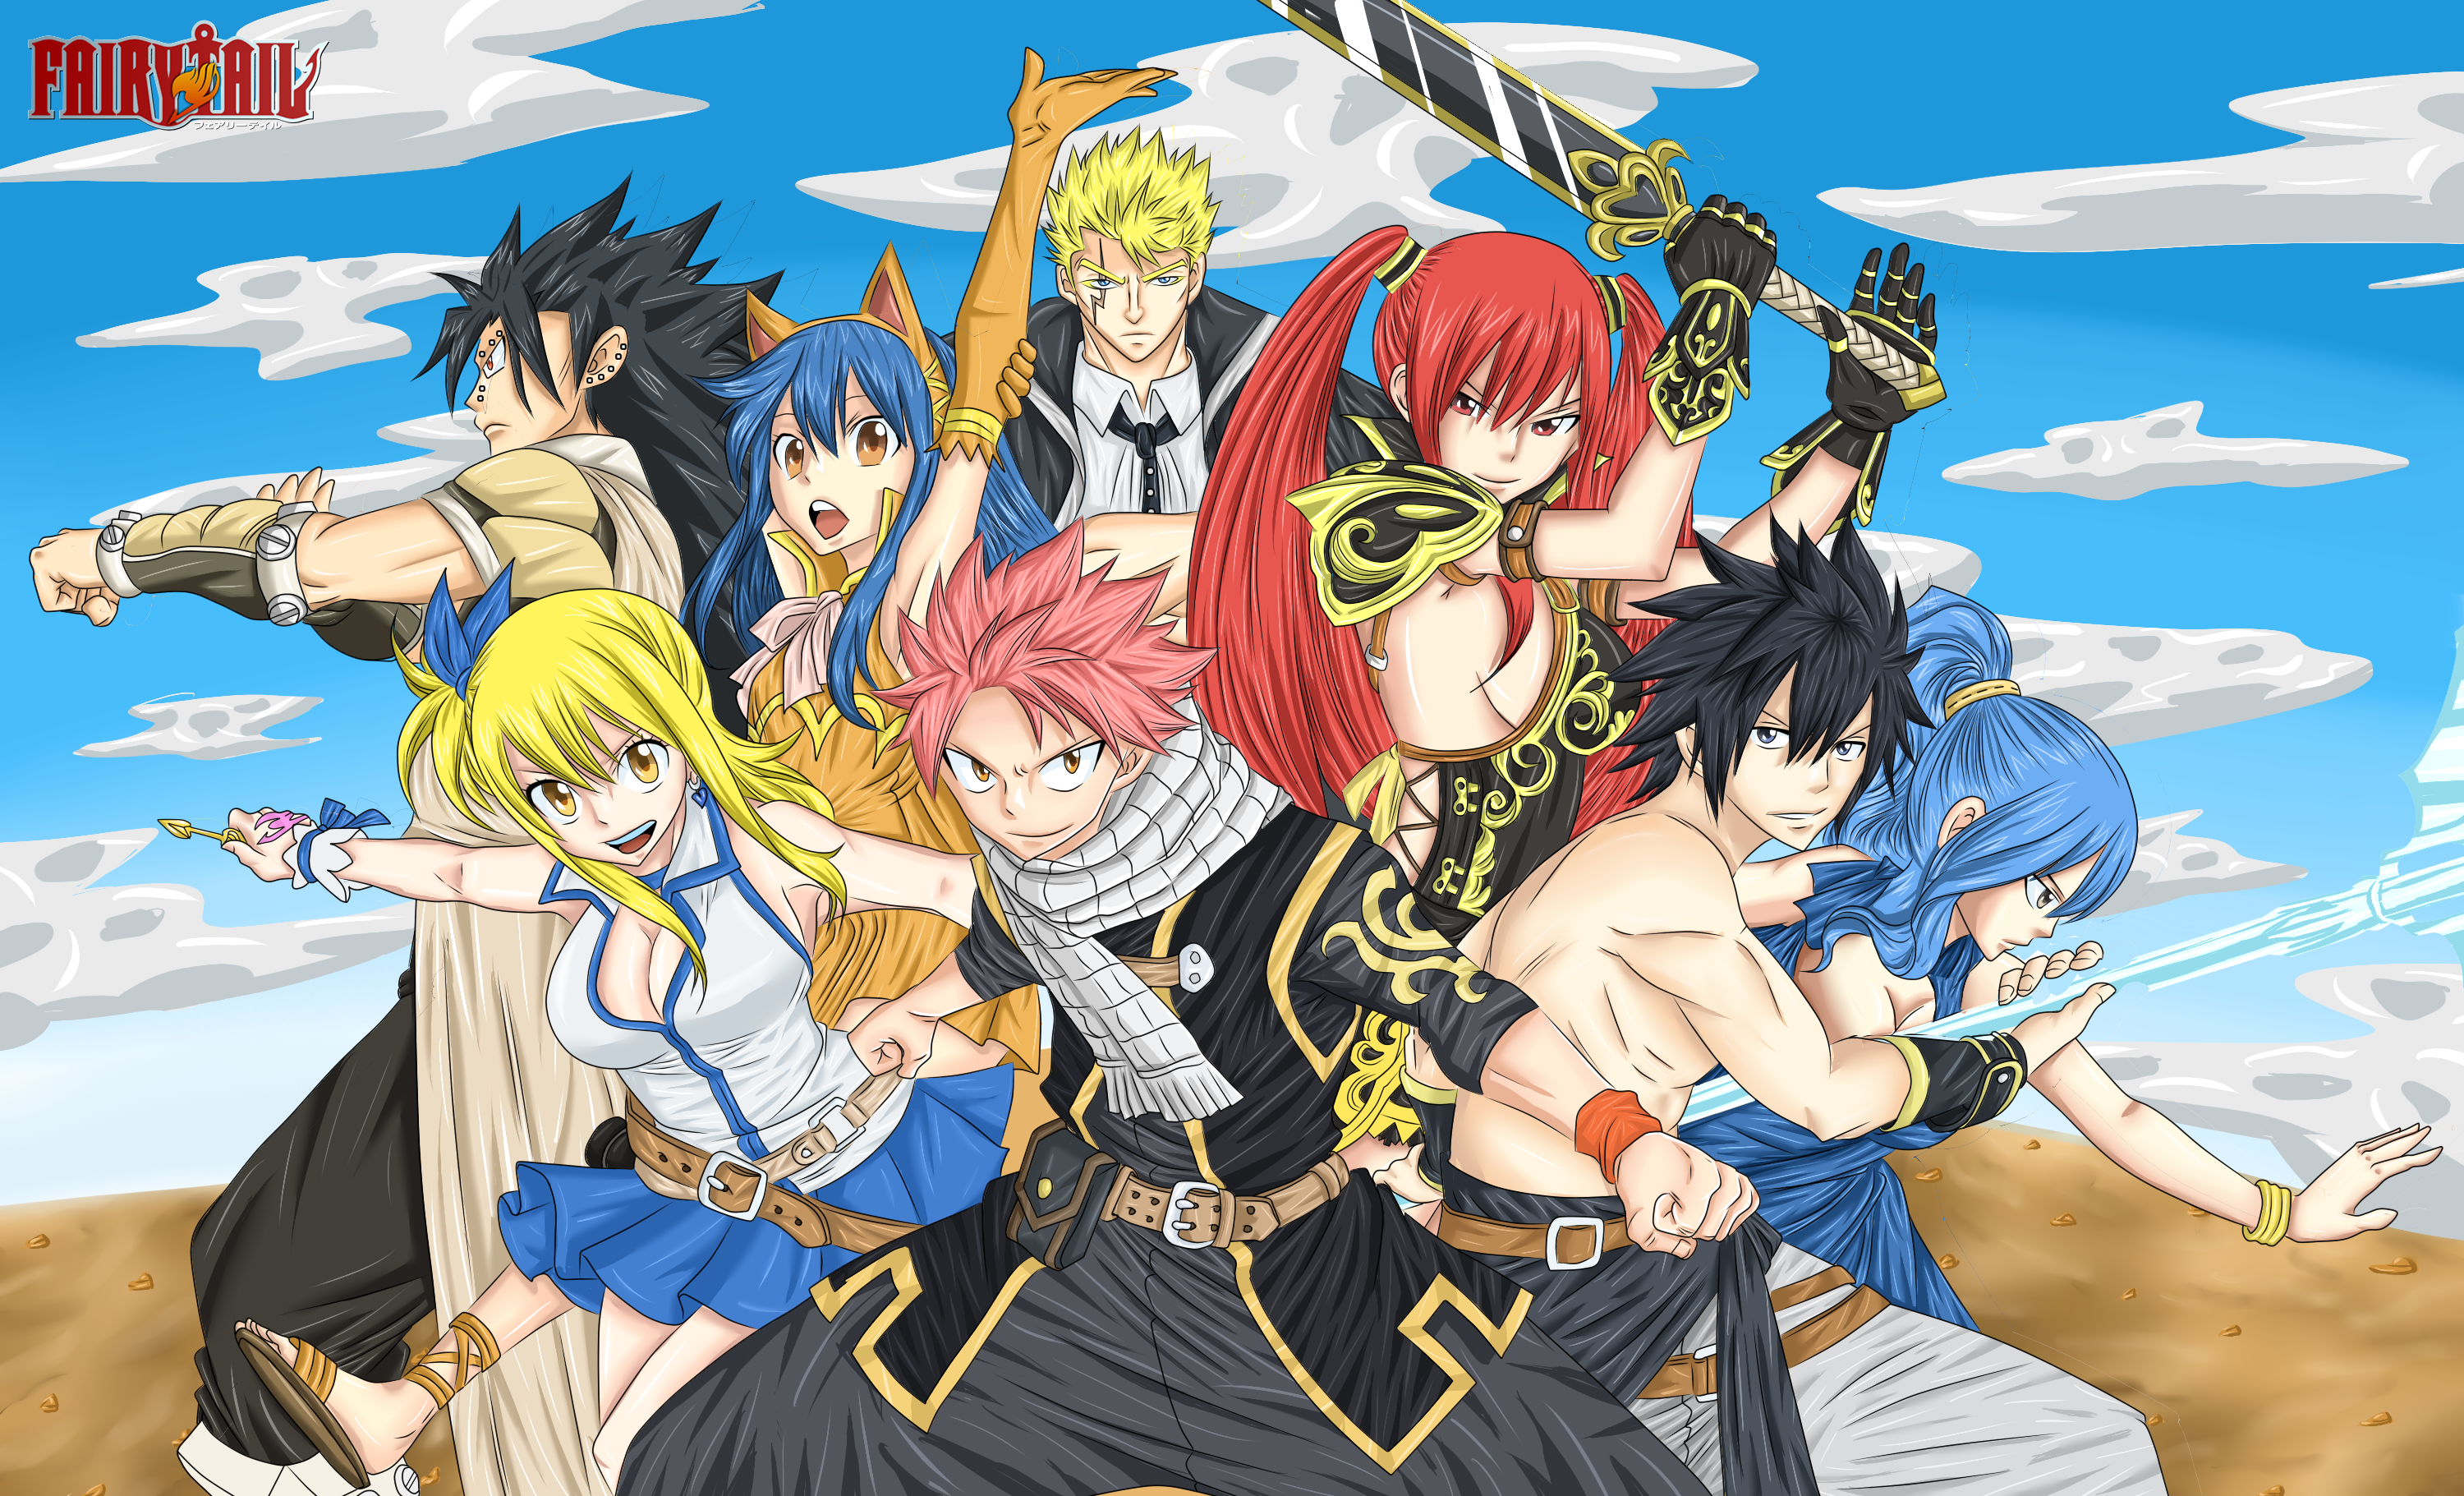 Fairy tail wallpapers hd